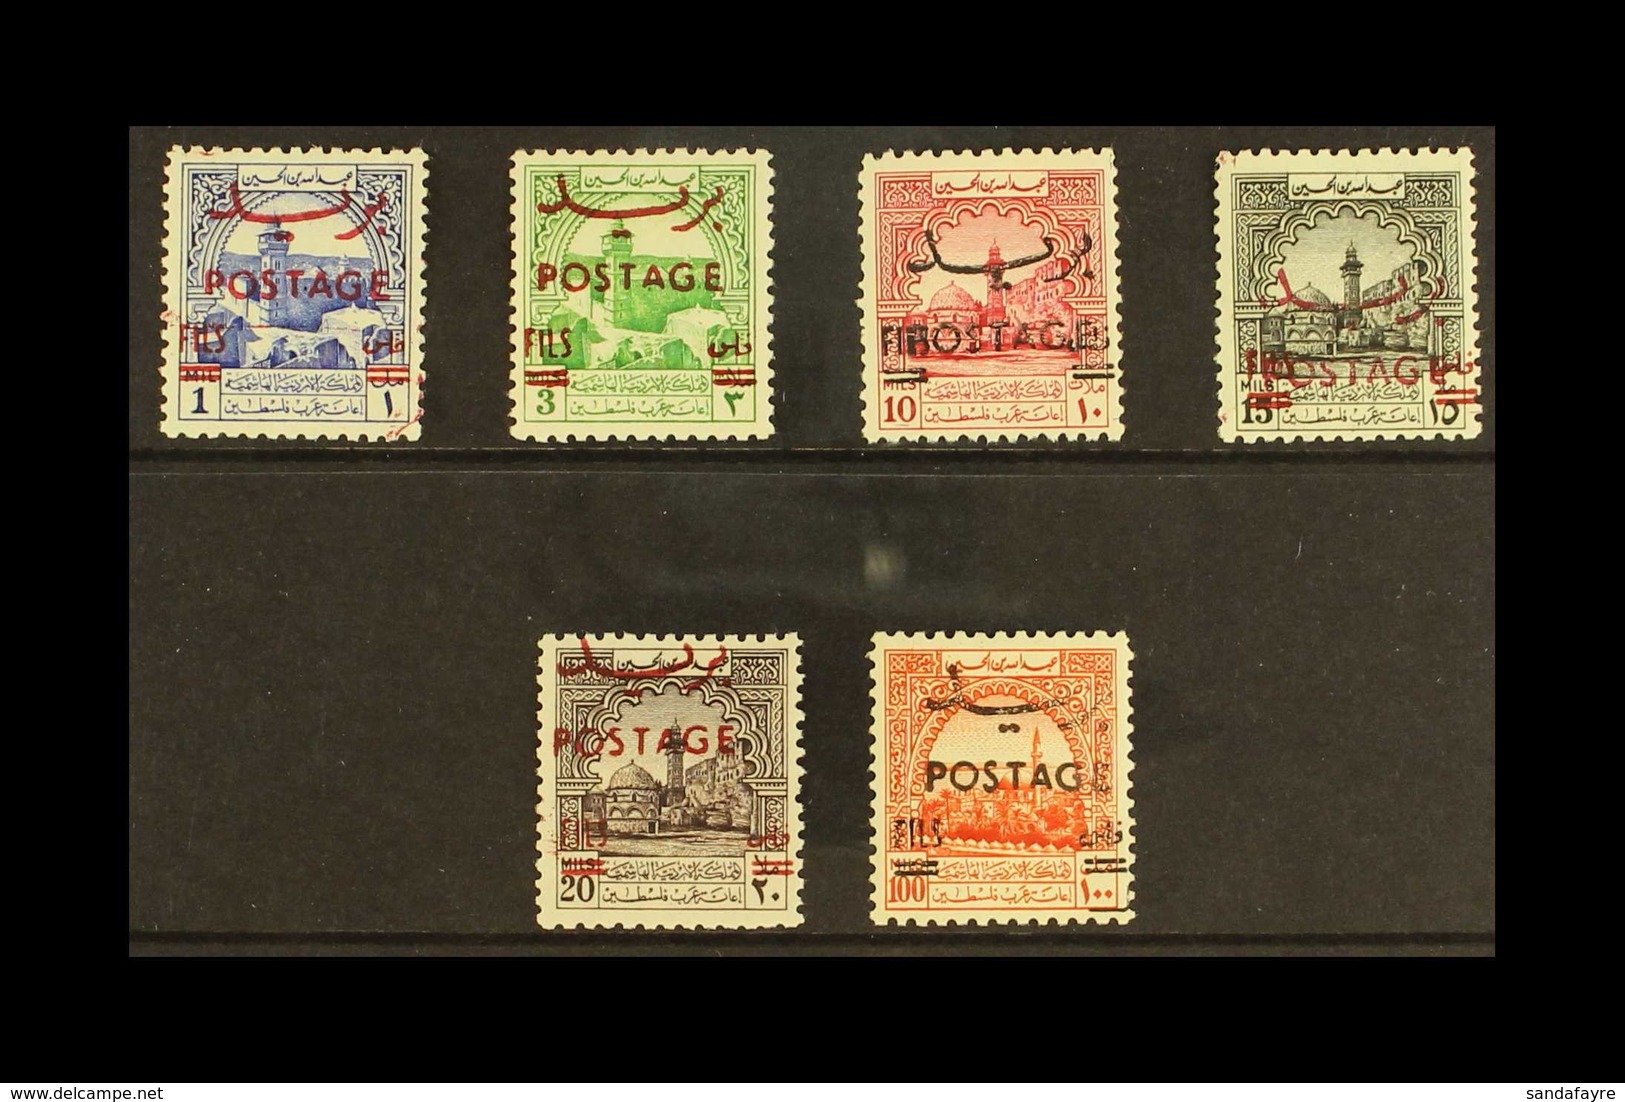 1955 Postage In "Fils" Overprinted On Obligatory Tax Stamps Inscribed "Mils", 1f On 1m To 100f On 100m, Set Complete, SG - Jordanie